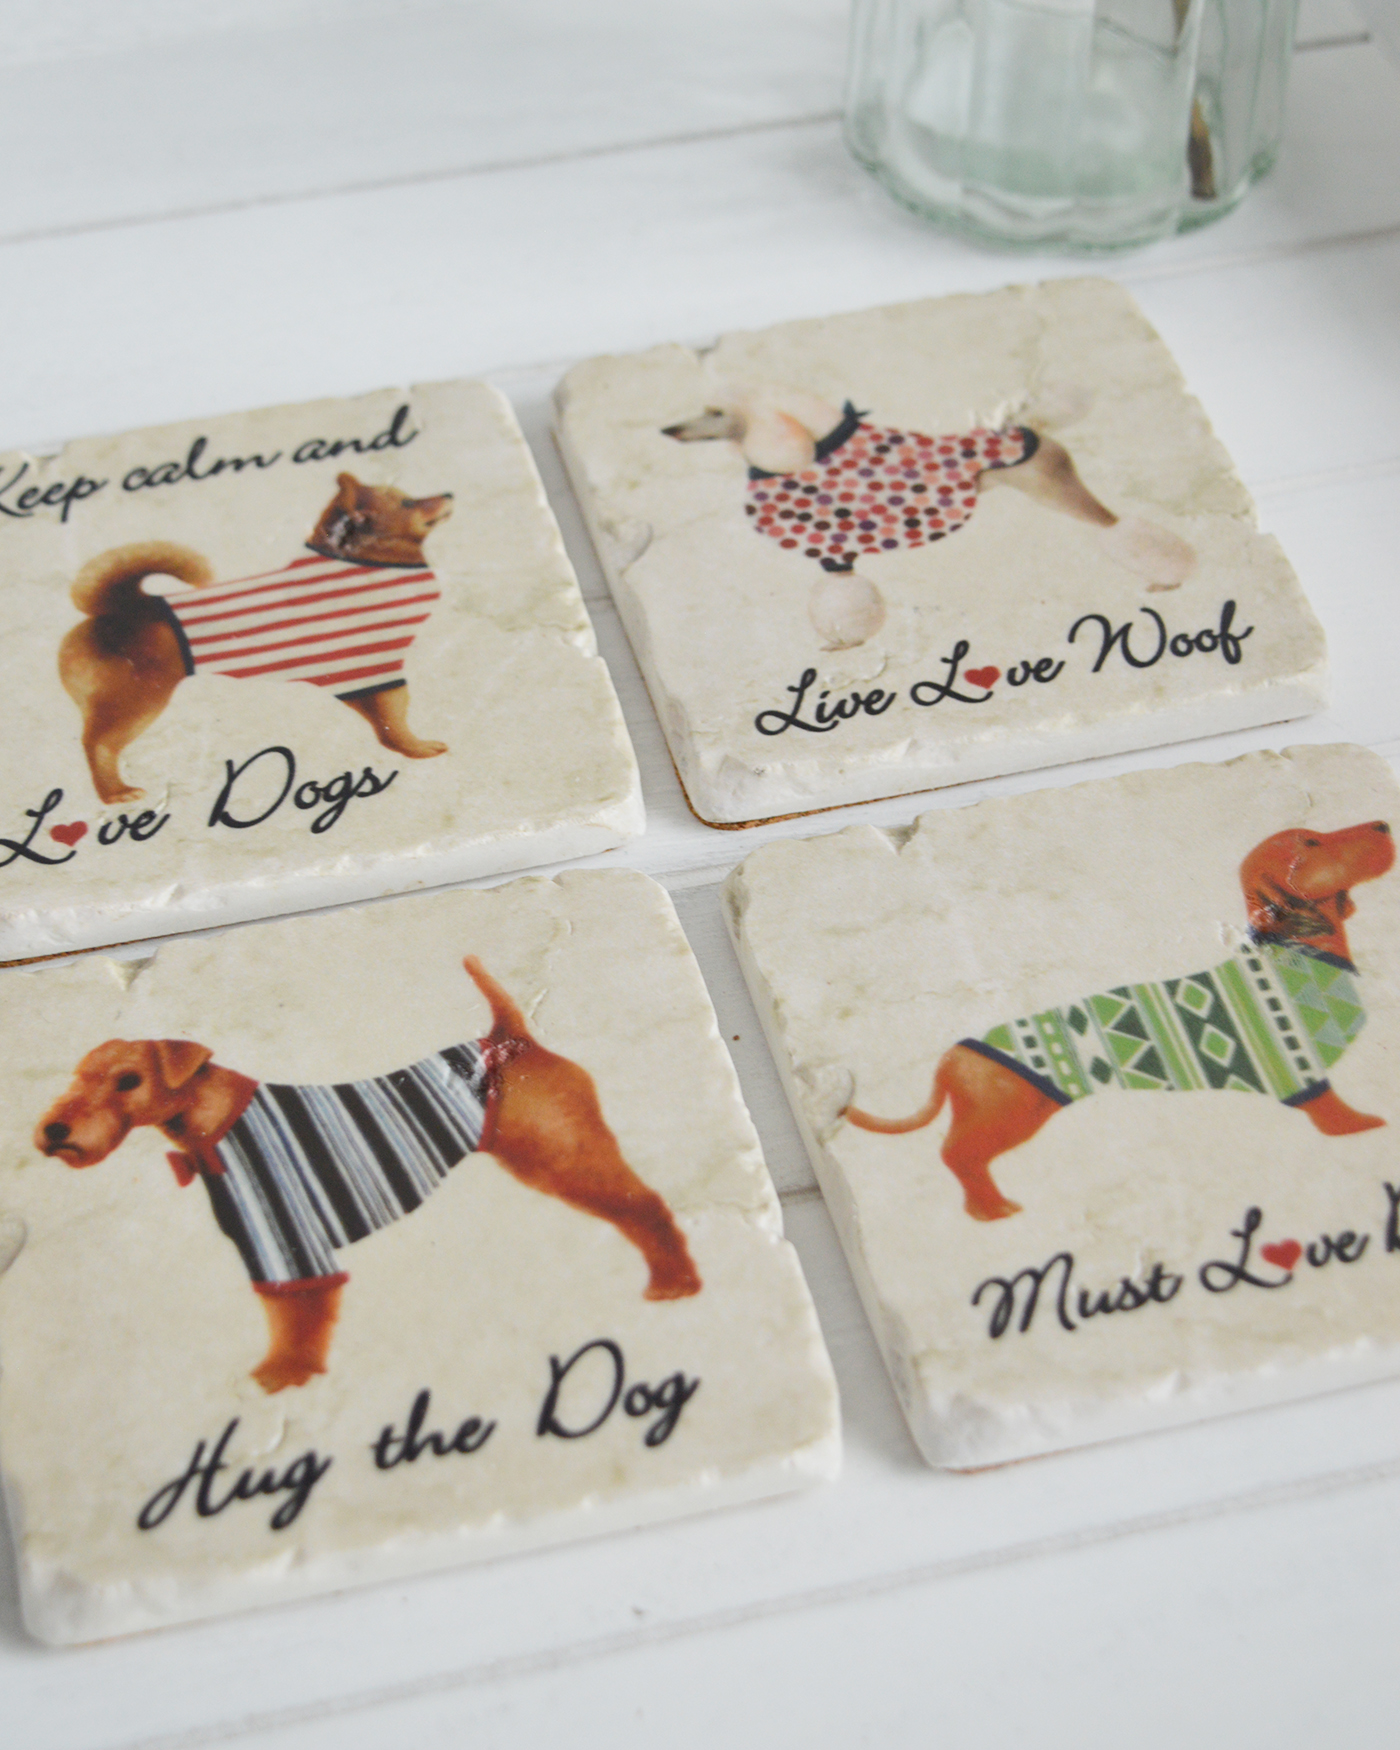 New England style home interiors from The White Lighthouse Furniture - Dog lover coasters